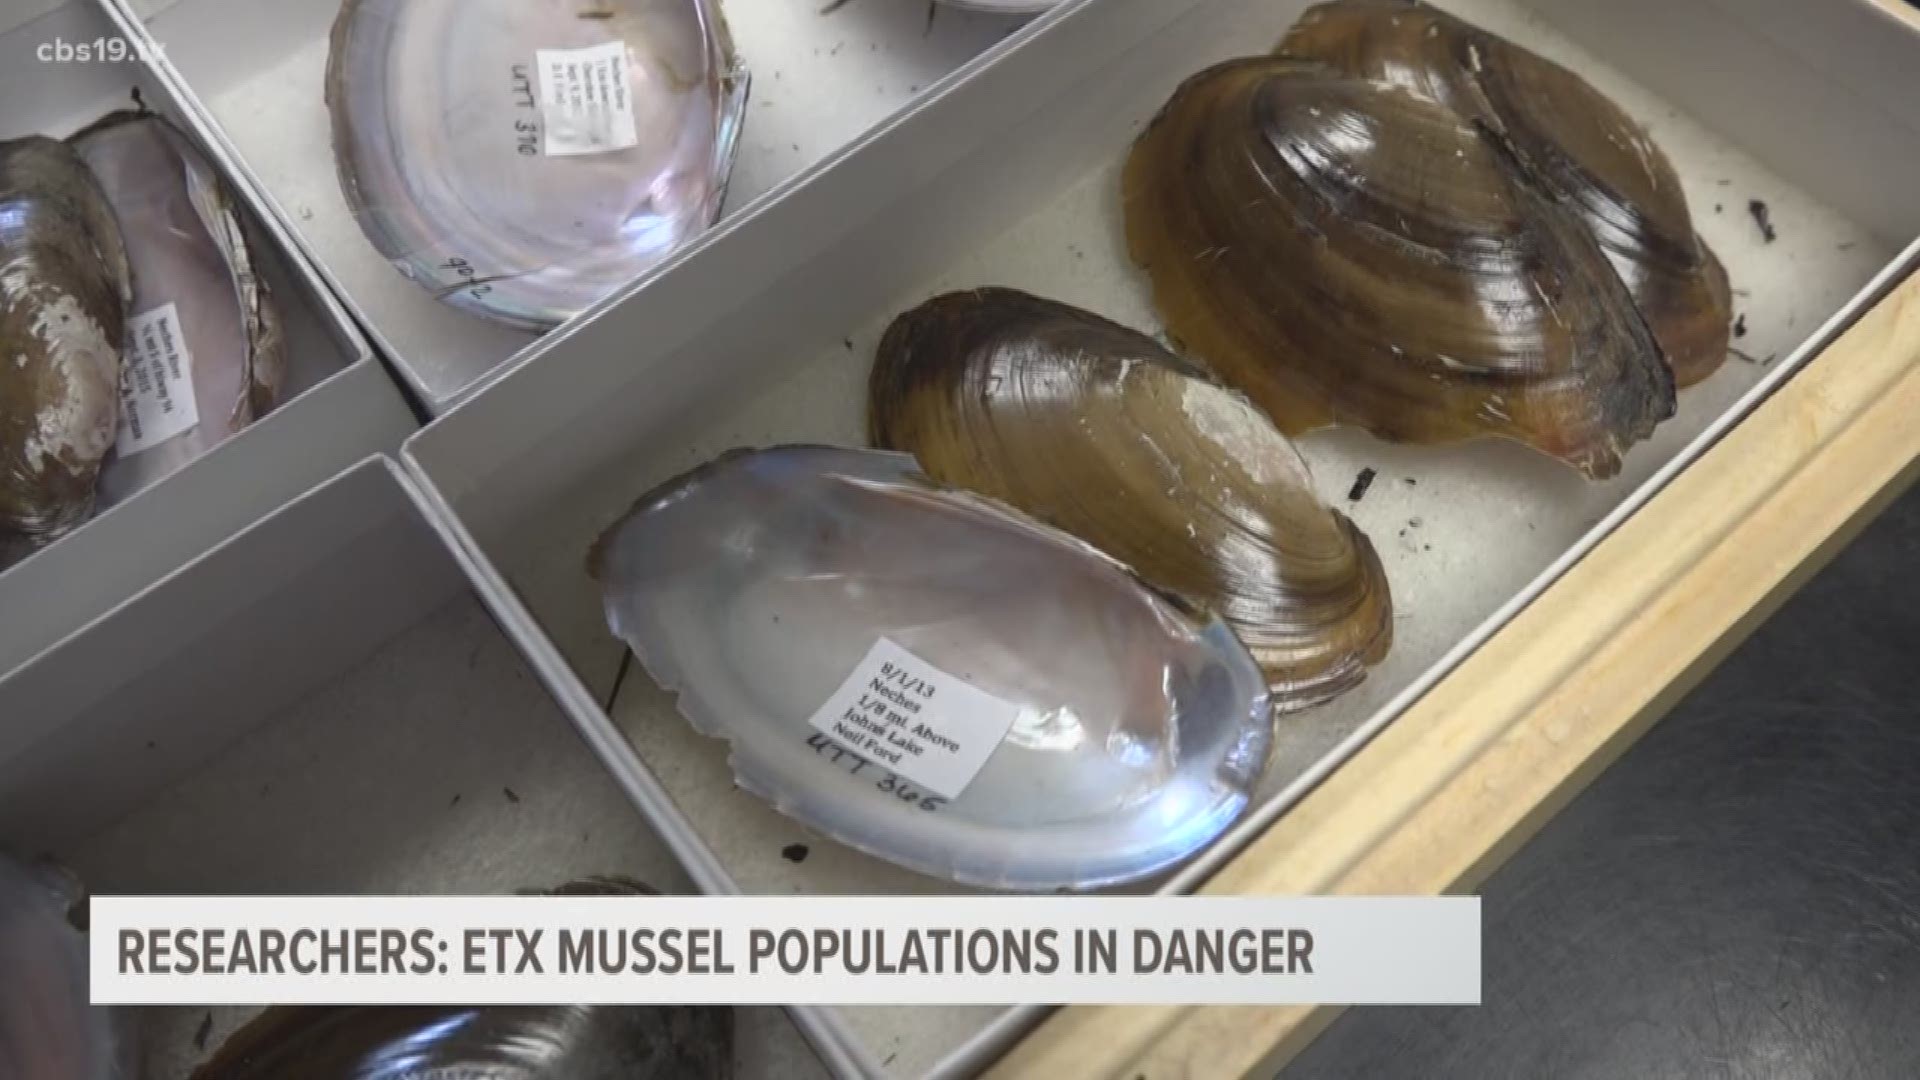 A predicted rise in water temperatures could spell disaster for ETX freshwater mussels and ETX drinking water sources.